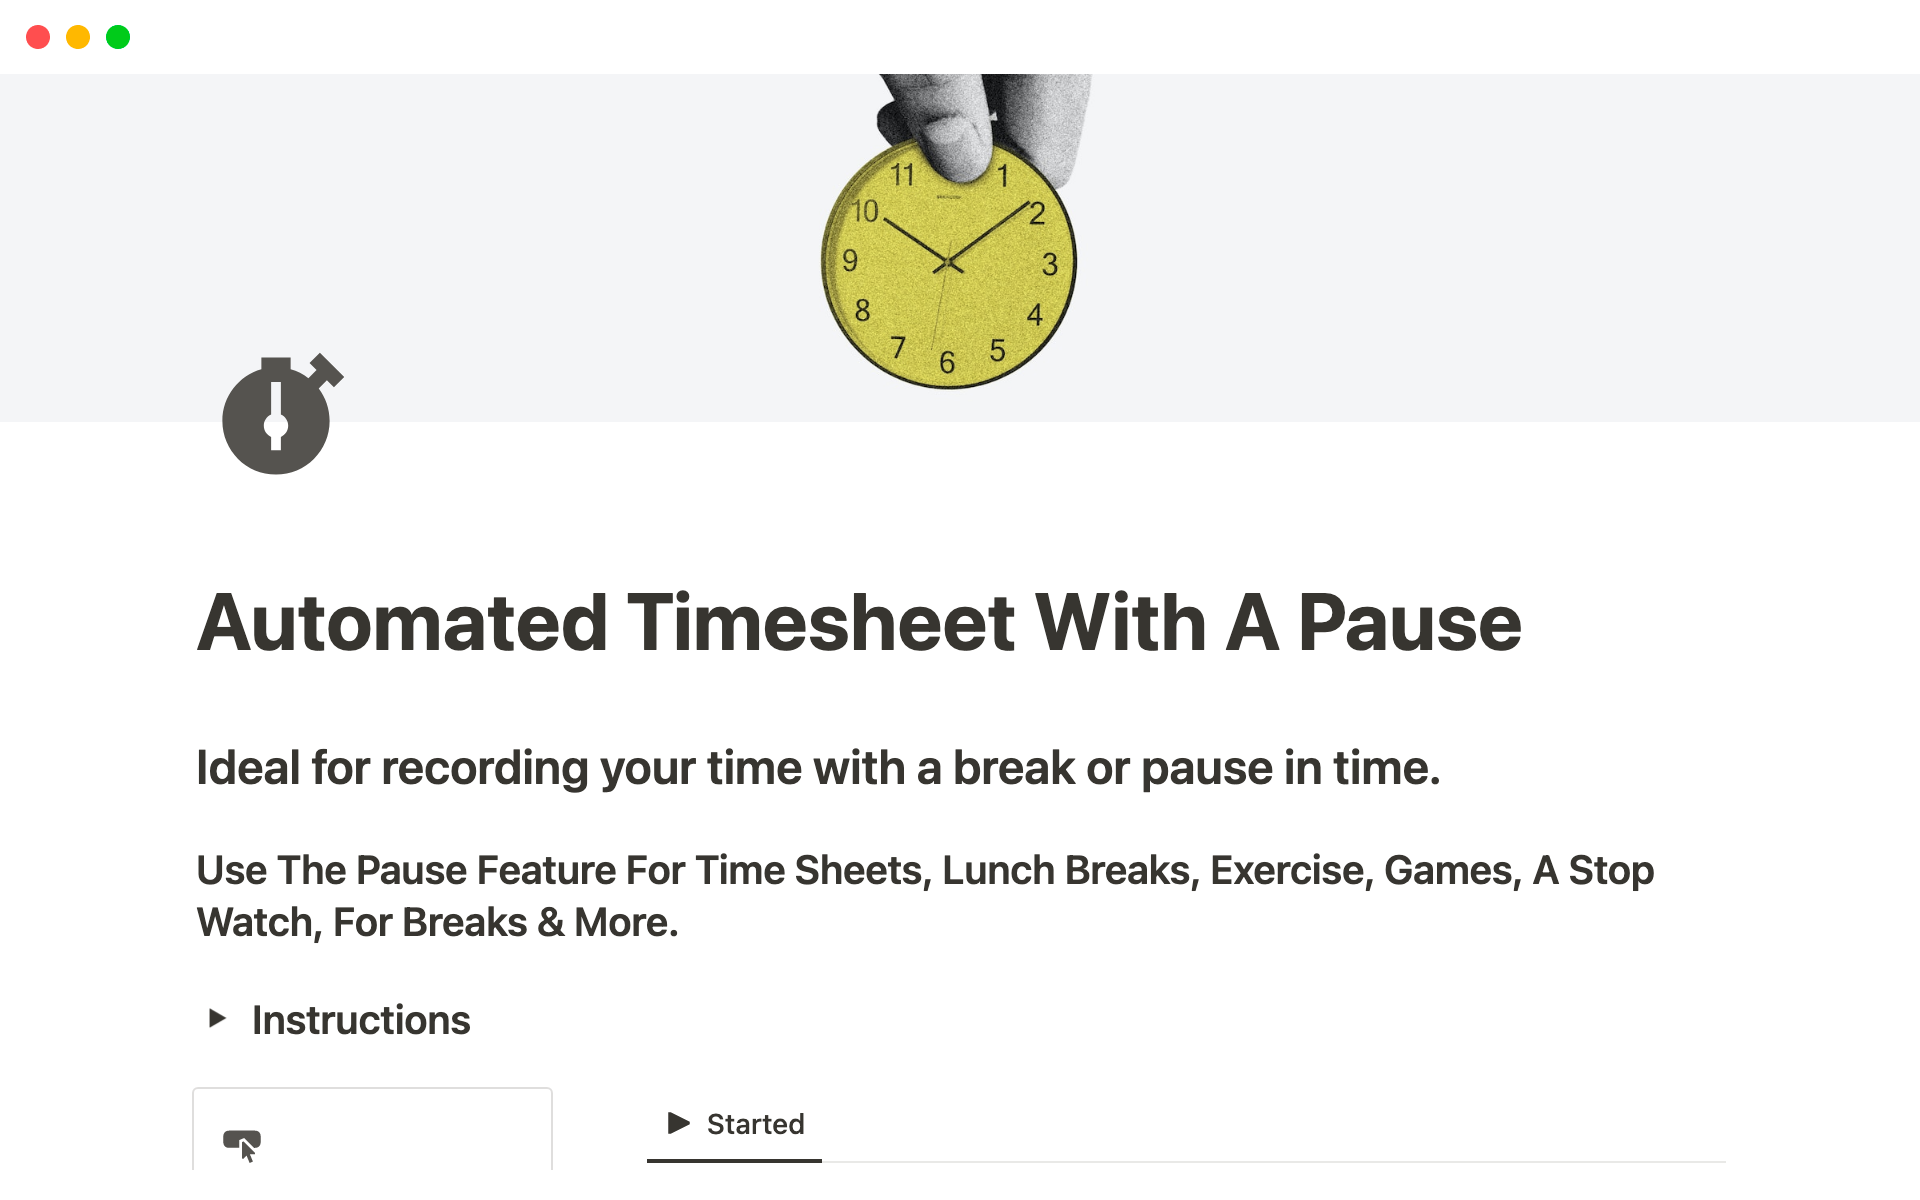 En forhåndsvisning av mal for Automated Timesheet With A Pause